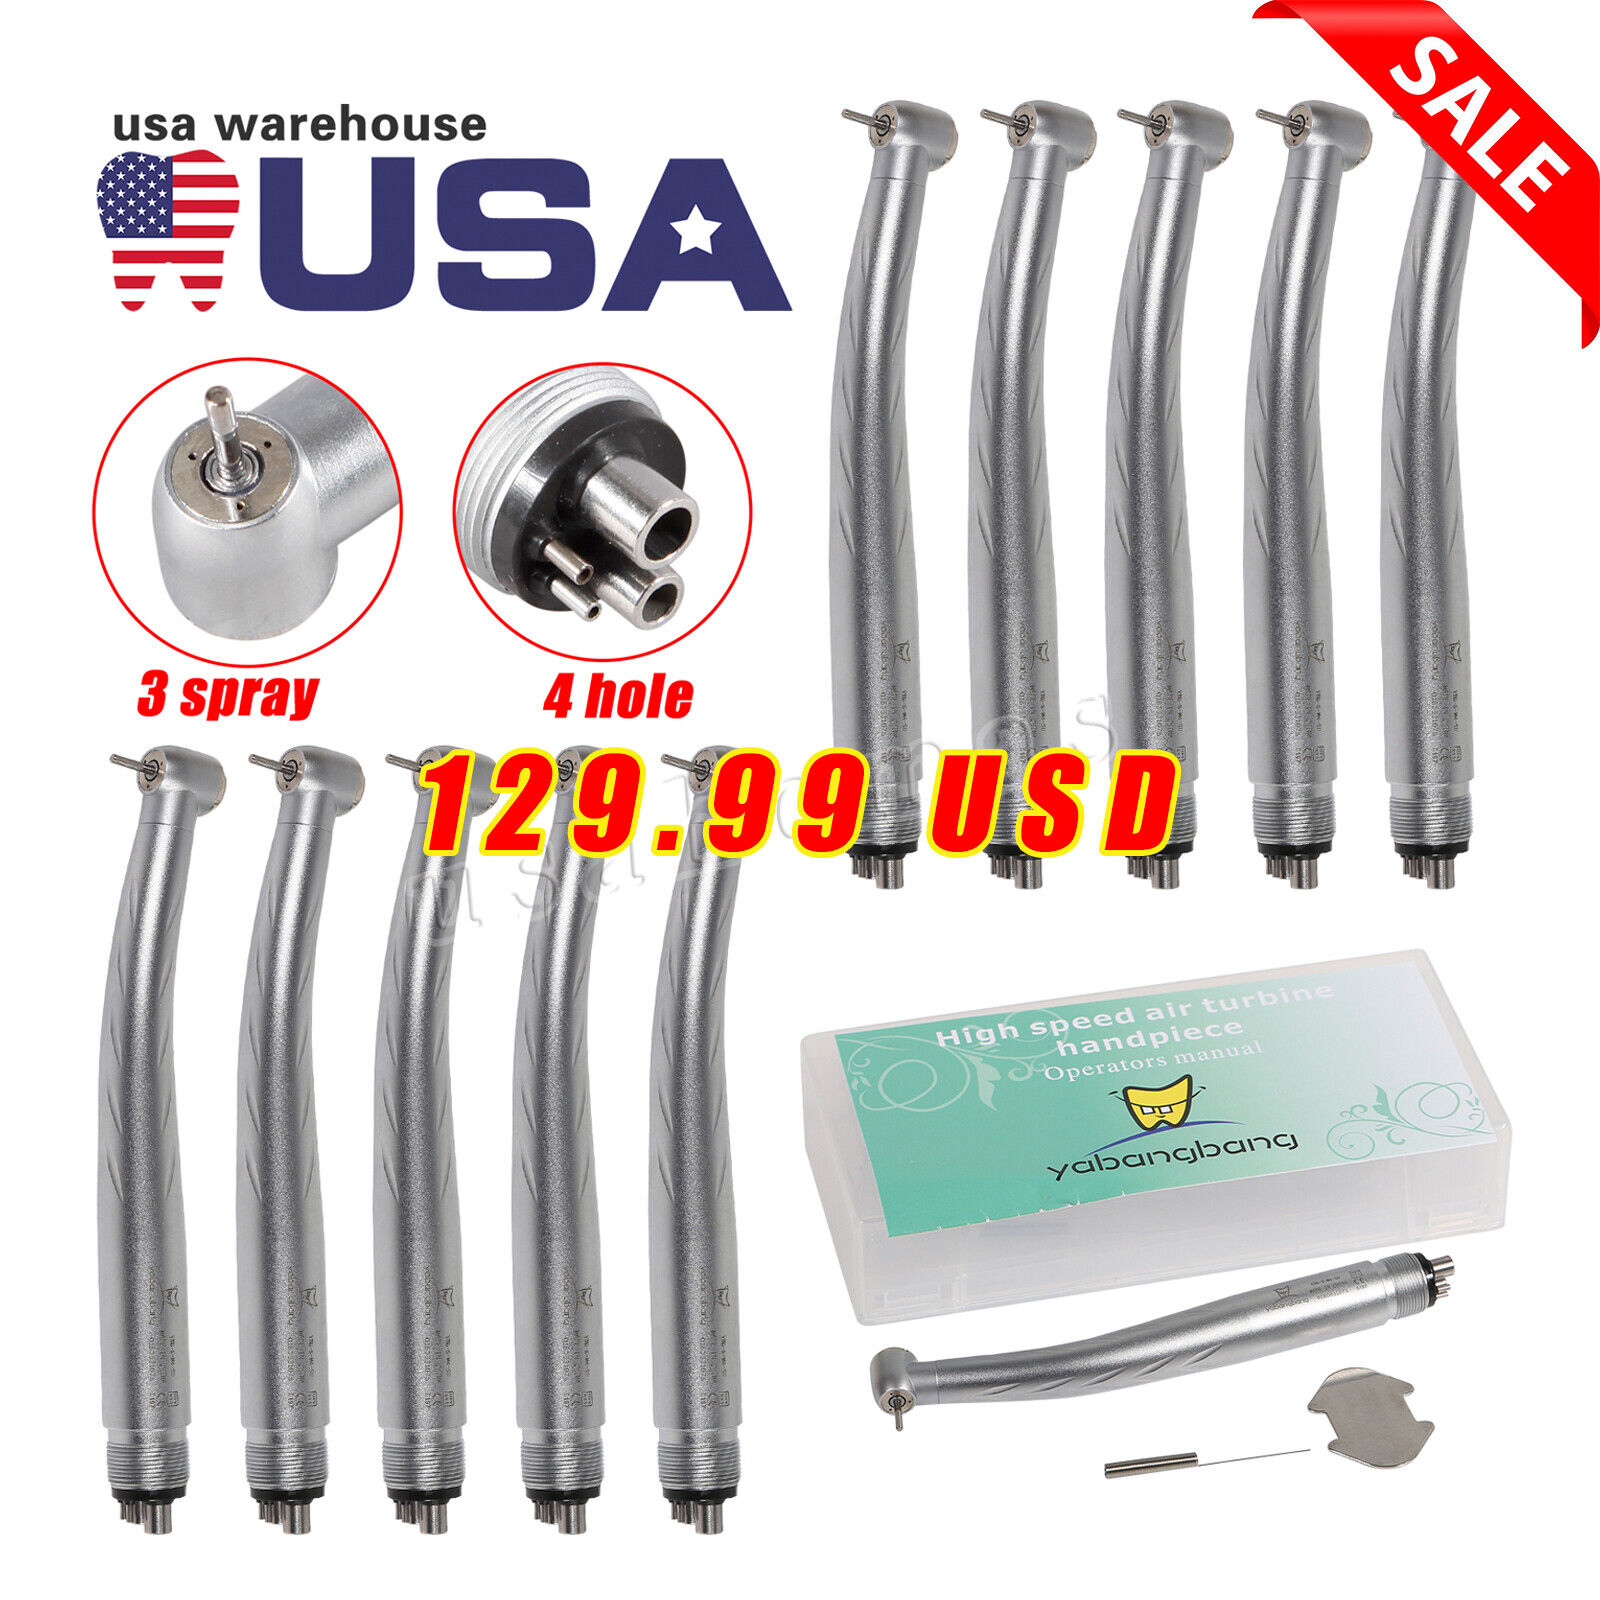 10 pieces High Speed Handpieces Dental Turbine Push Button Triple Water Yabang